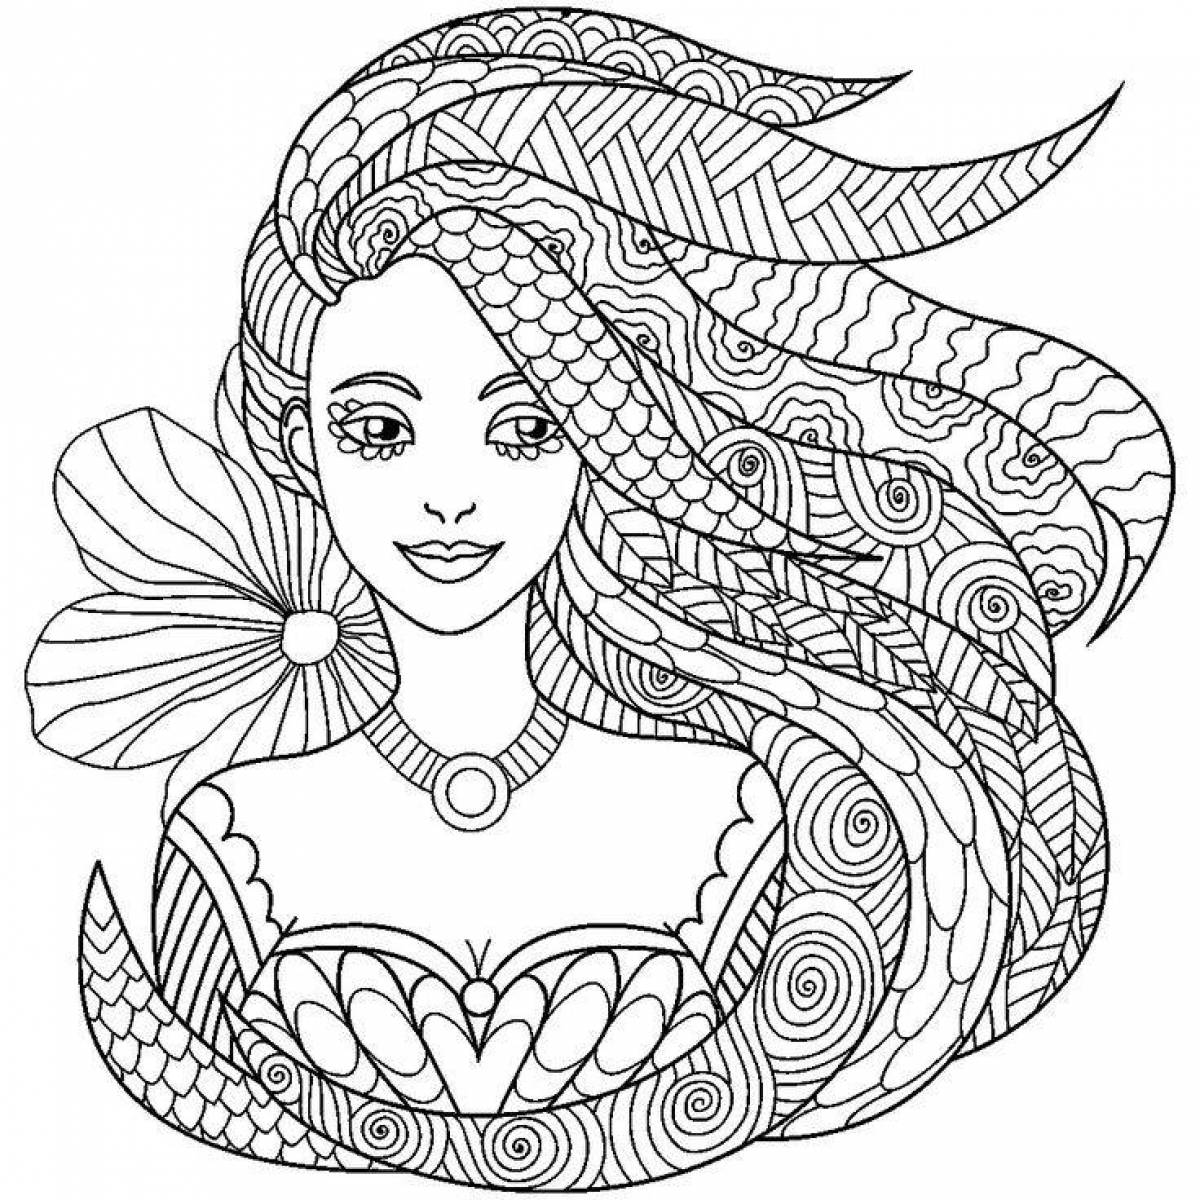 Coloring page Happy Wednesday 2022